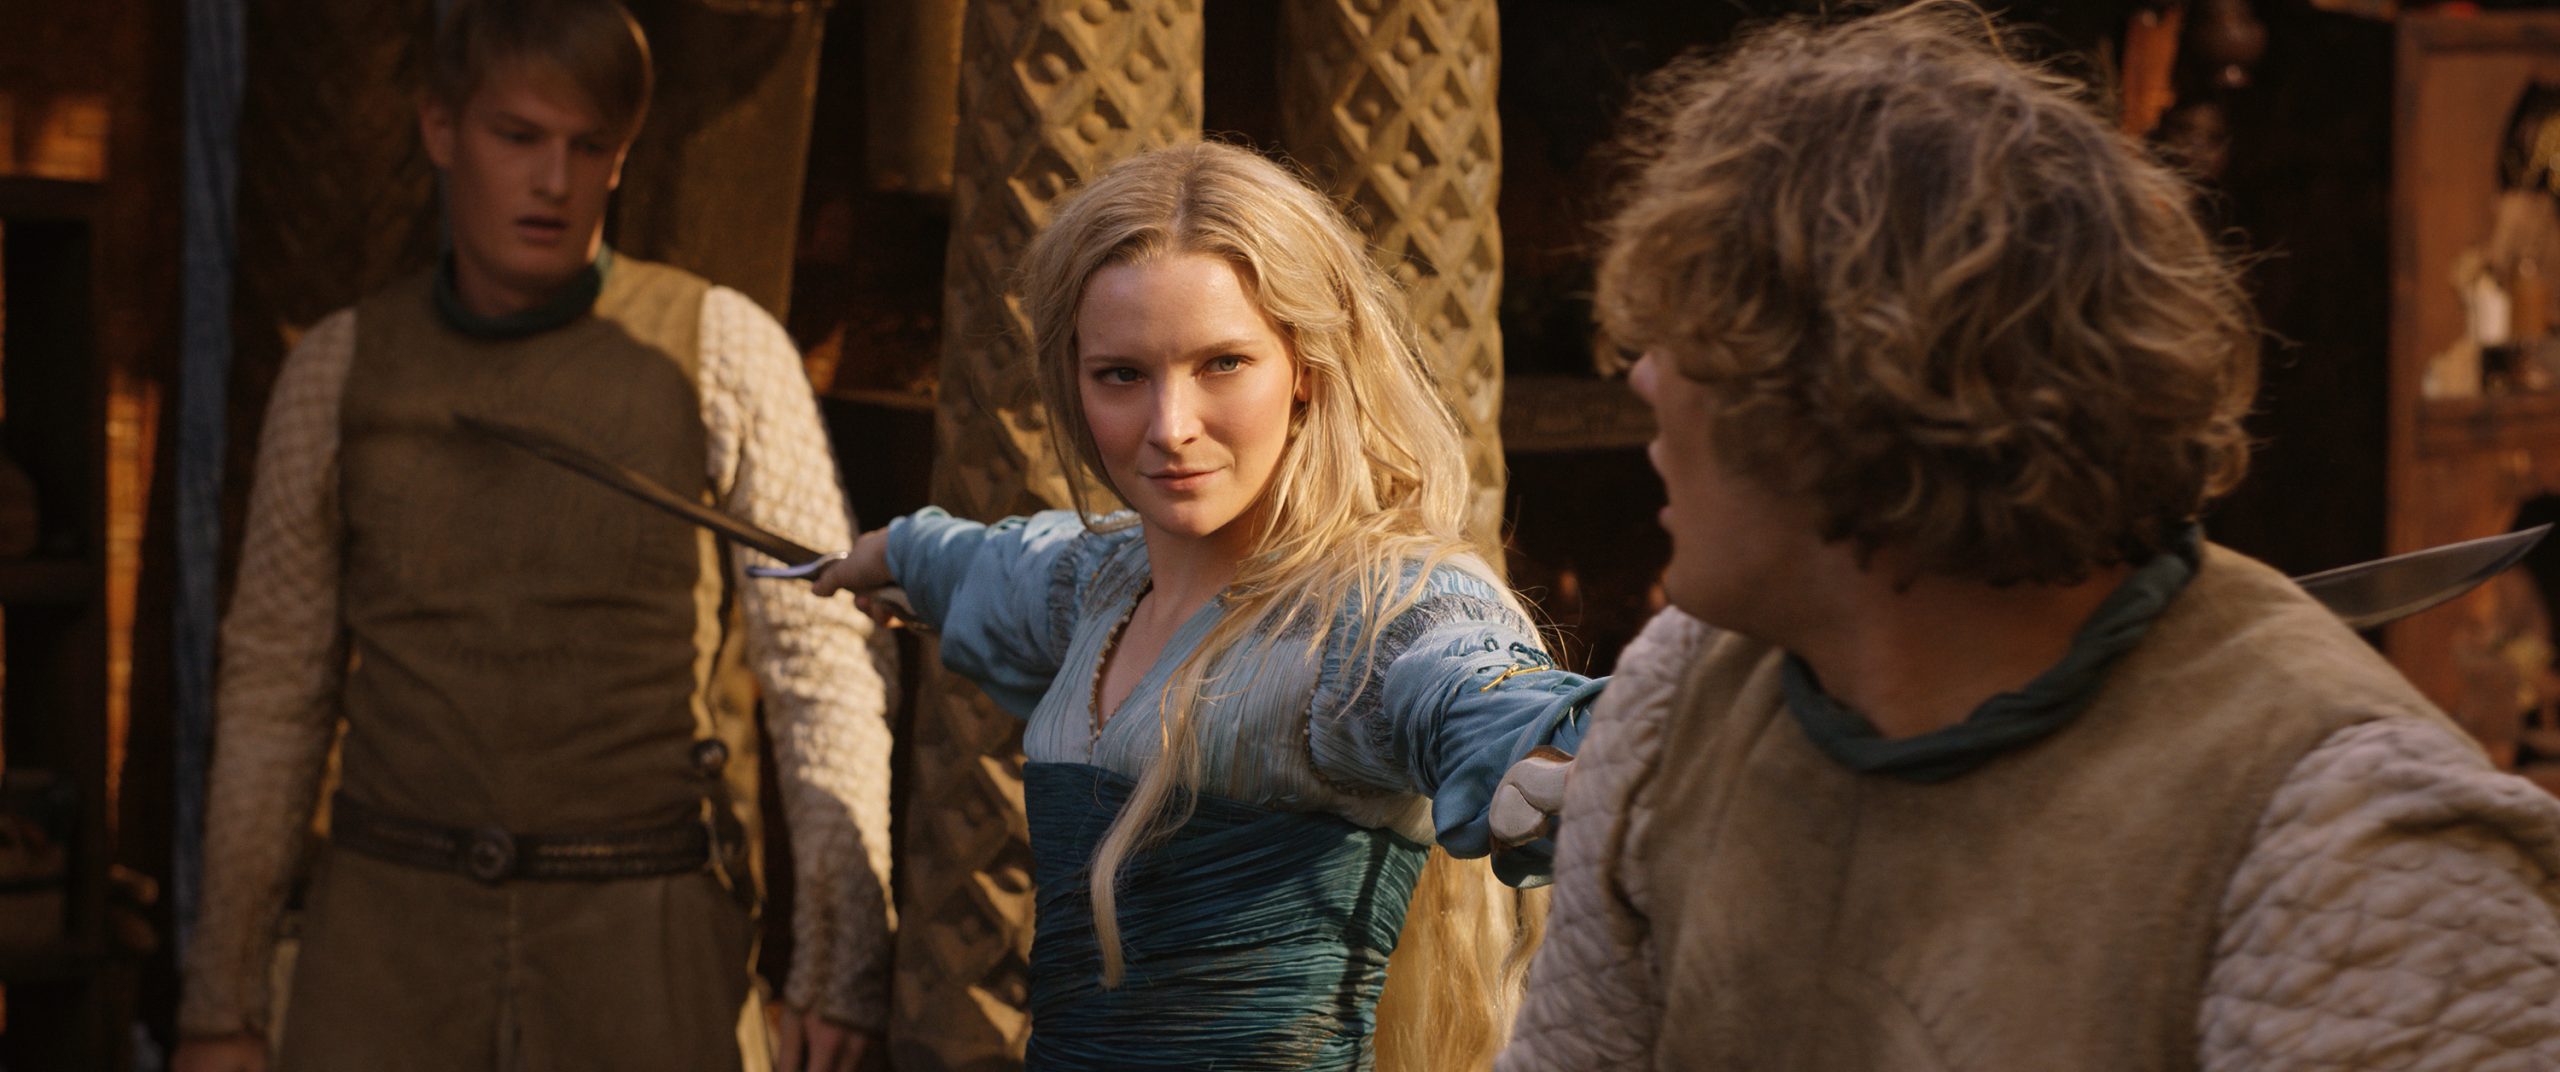 Galadriel (Morfydd Clark) draws her blades against two upstart warriors in The Lord of the Rings: The Rings of Power Season 1 Episode 5 "Parting" (2022), Amazon Studios